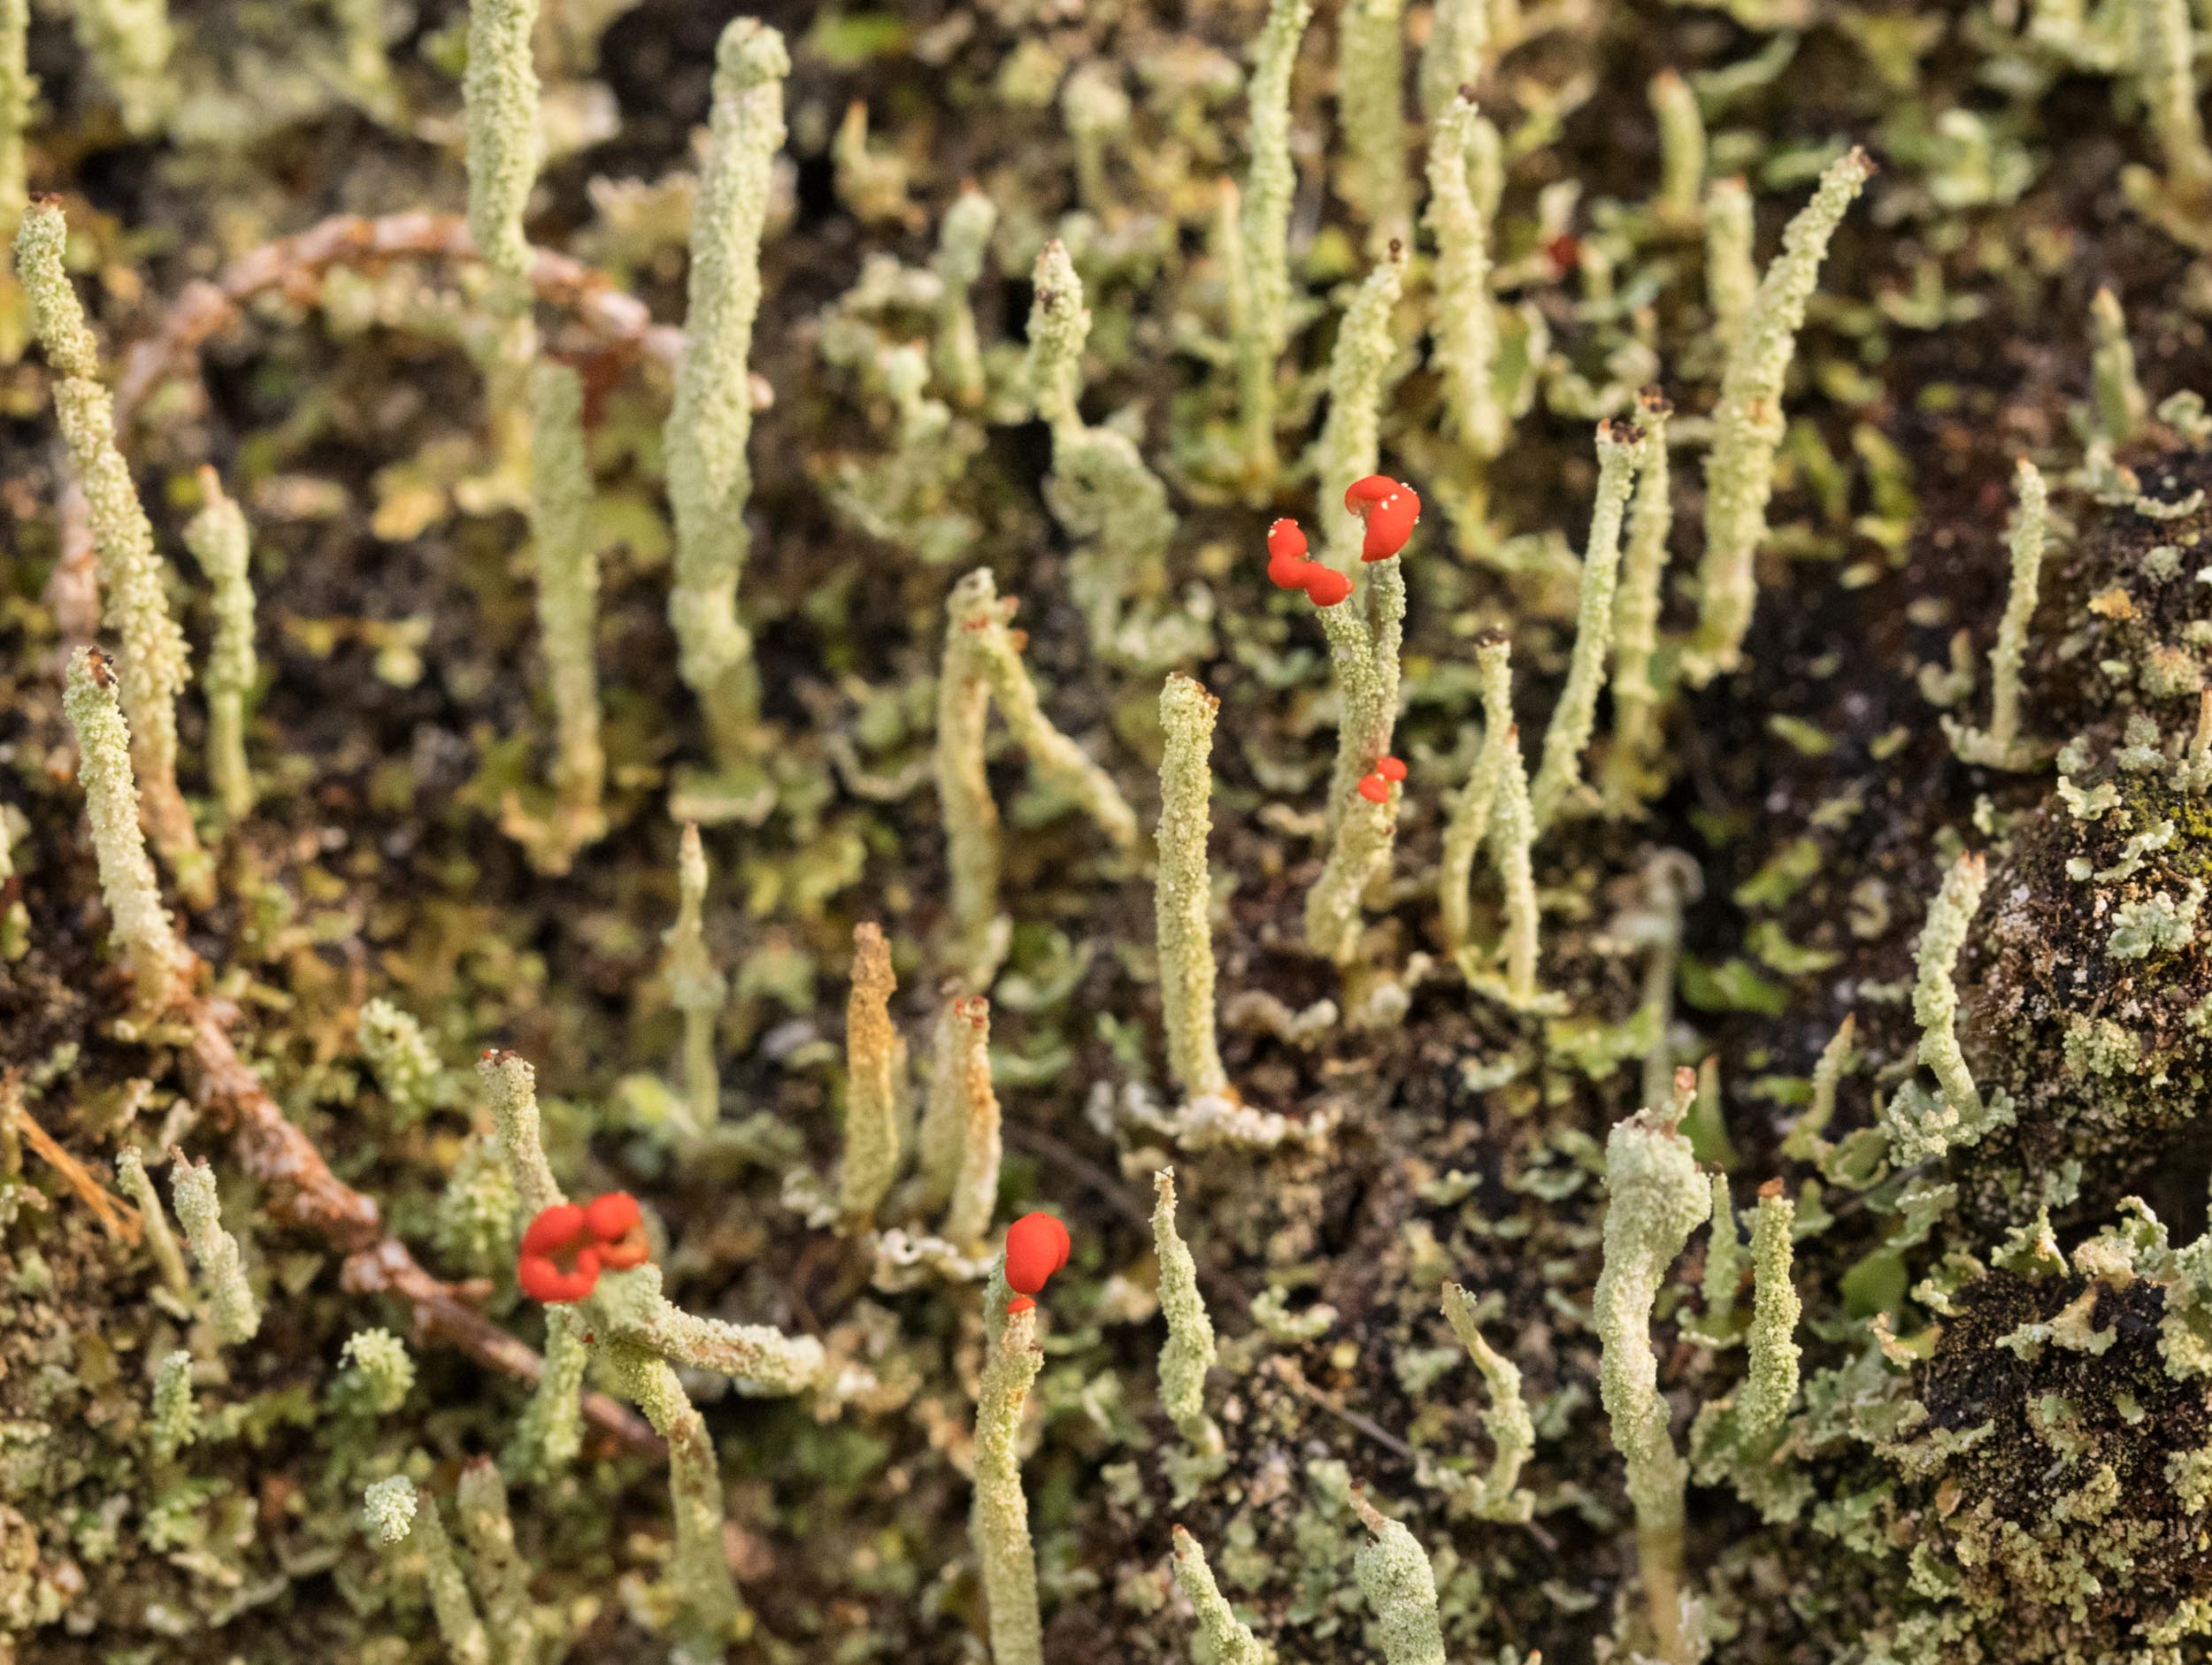  Some of these vertical stalks bear red apothecae - structures within which fungal spores are formed. 